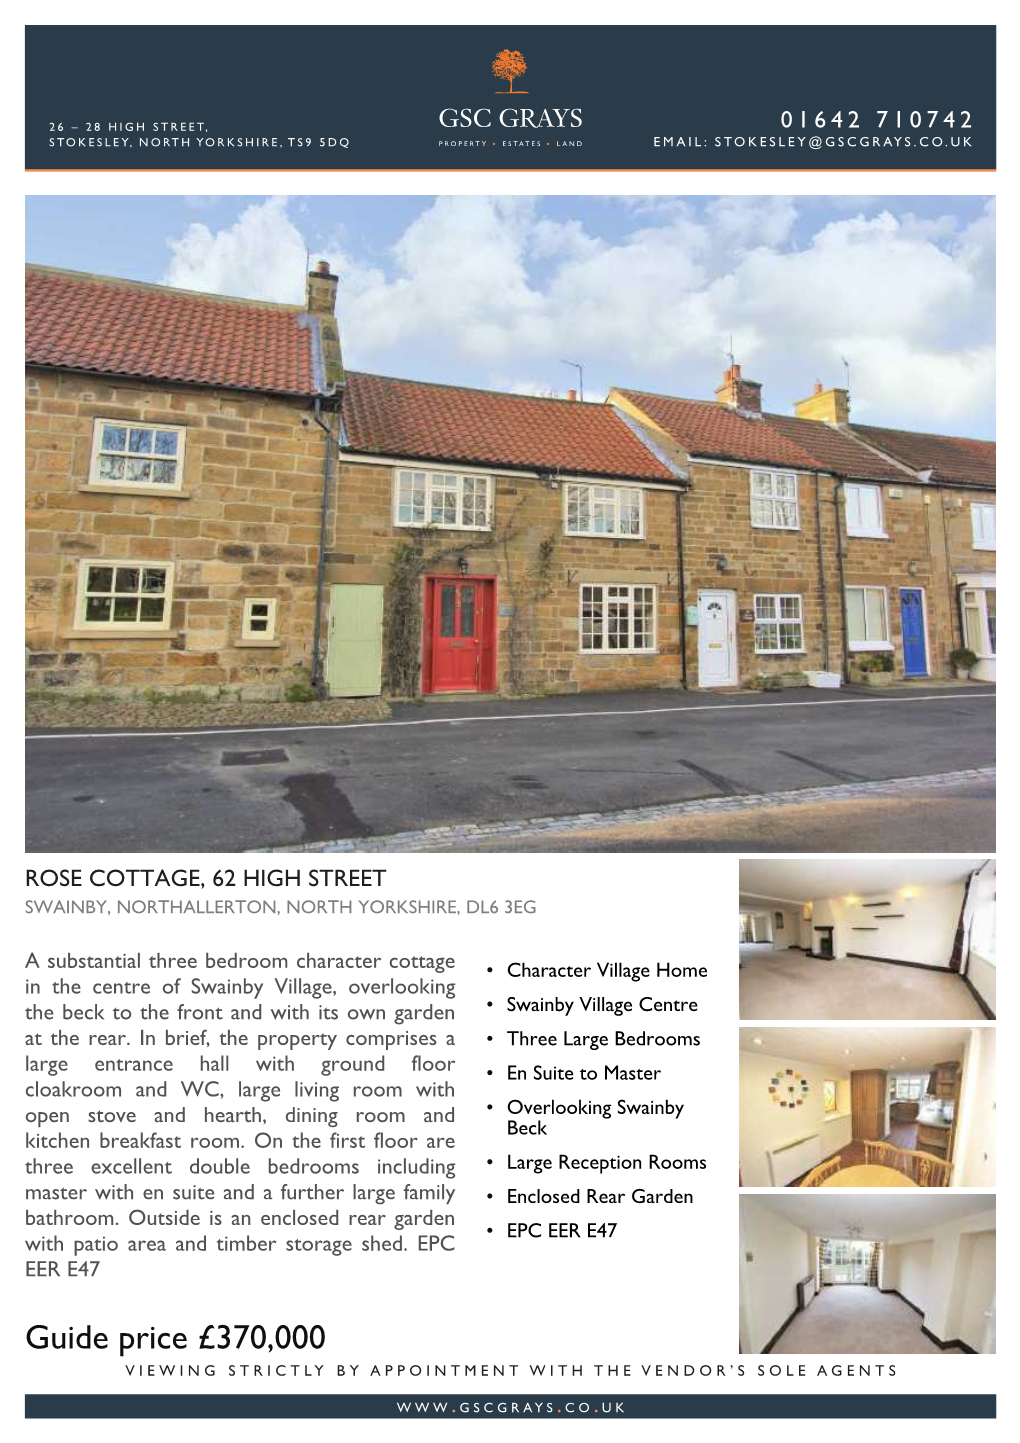 Guide Price £370,000 VIEWING STRICTLY by APPOINTMENT with the VENDOR’S SOLE AGENTS